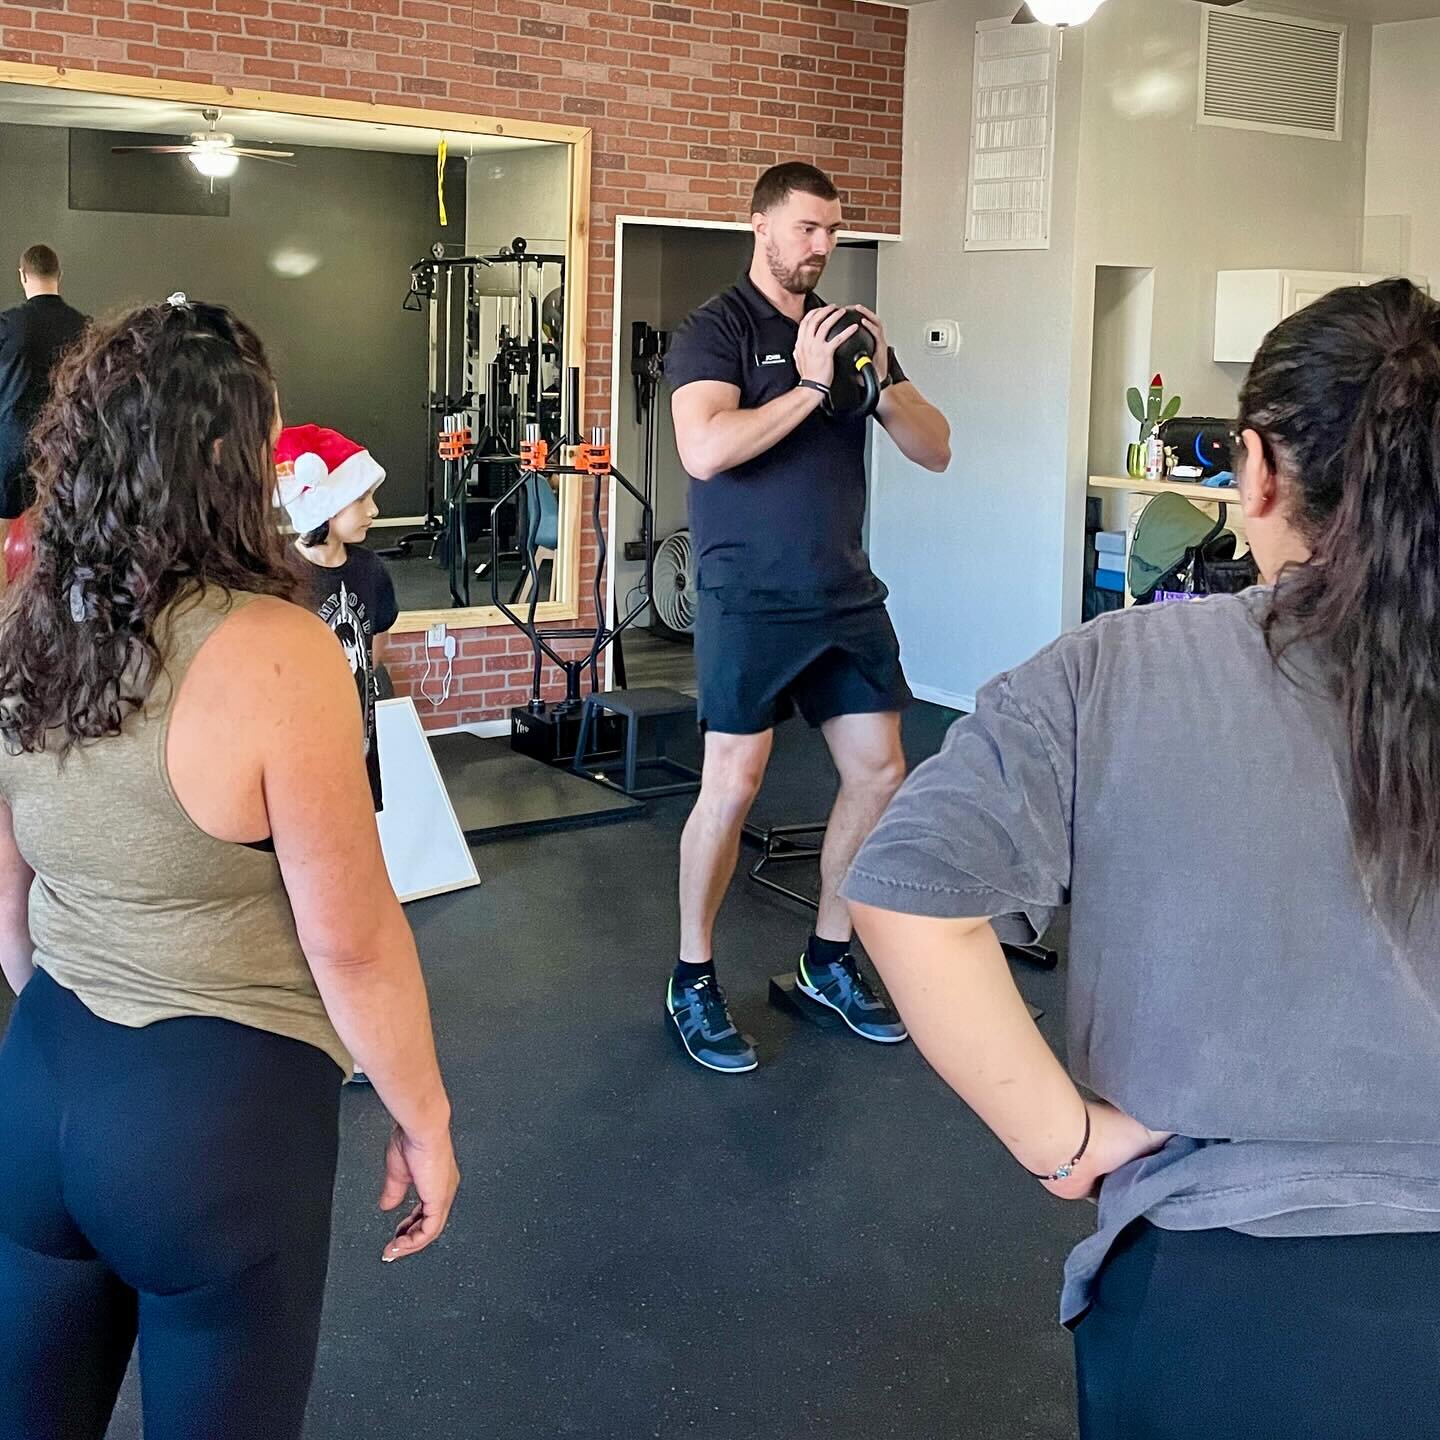 Benefits of Small group personal training!

✅ Much more affordable than 1 on 1

✅ Build confidence in a private gym

✅ Better results

When you workout in a small group you get individual attention from your coach. Just like in the classroom, smaller